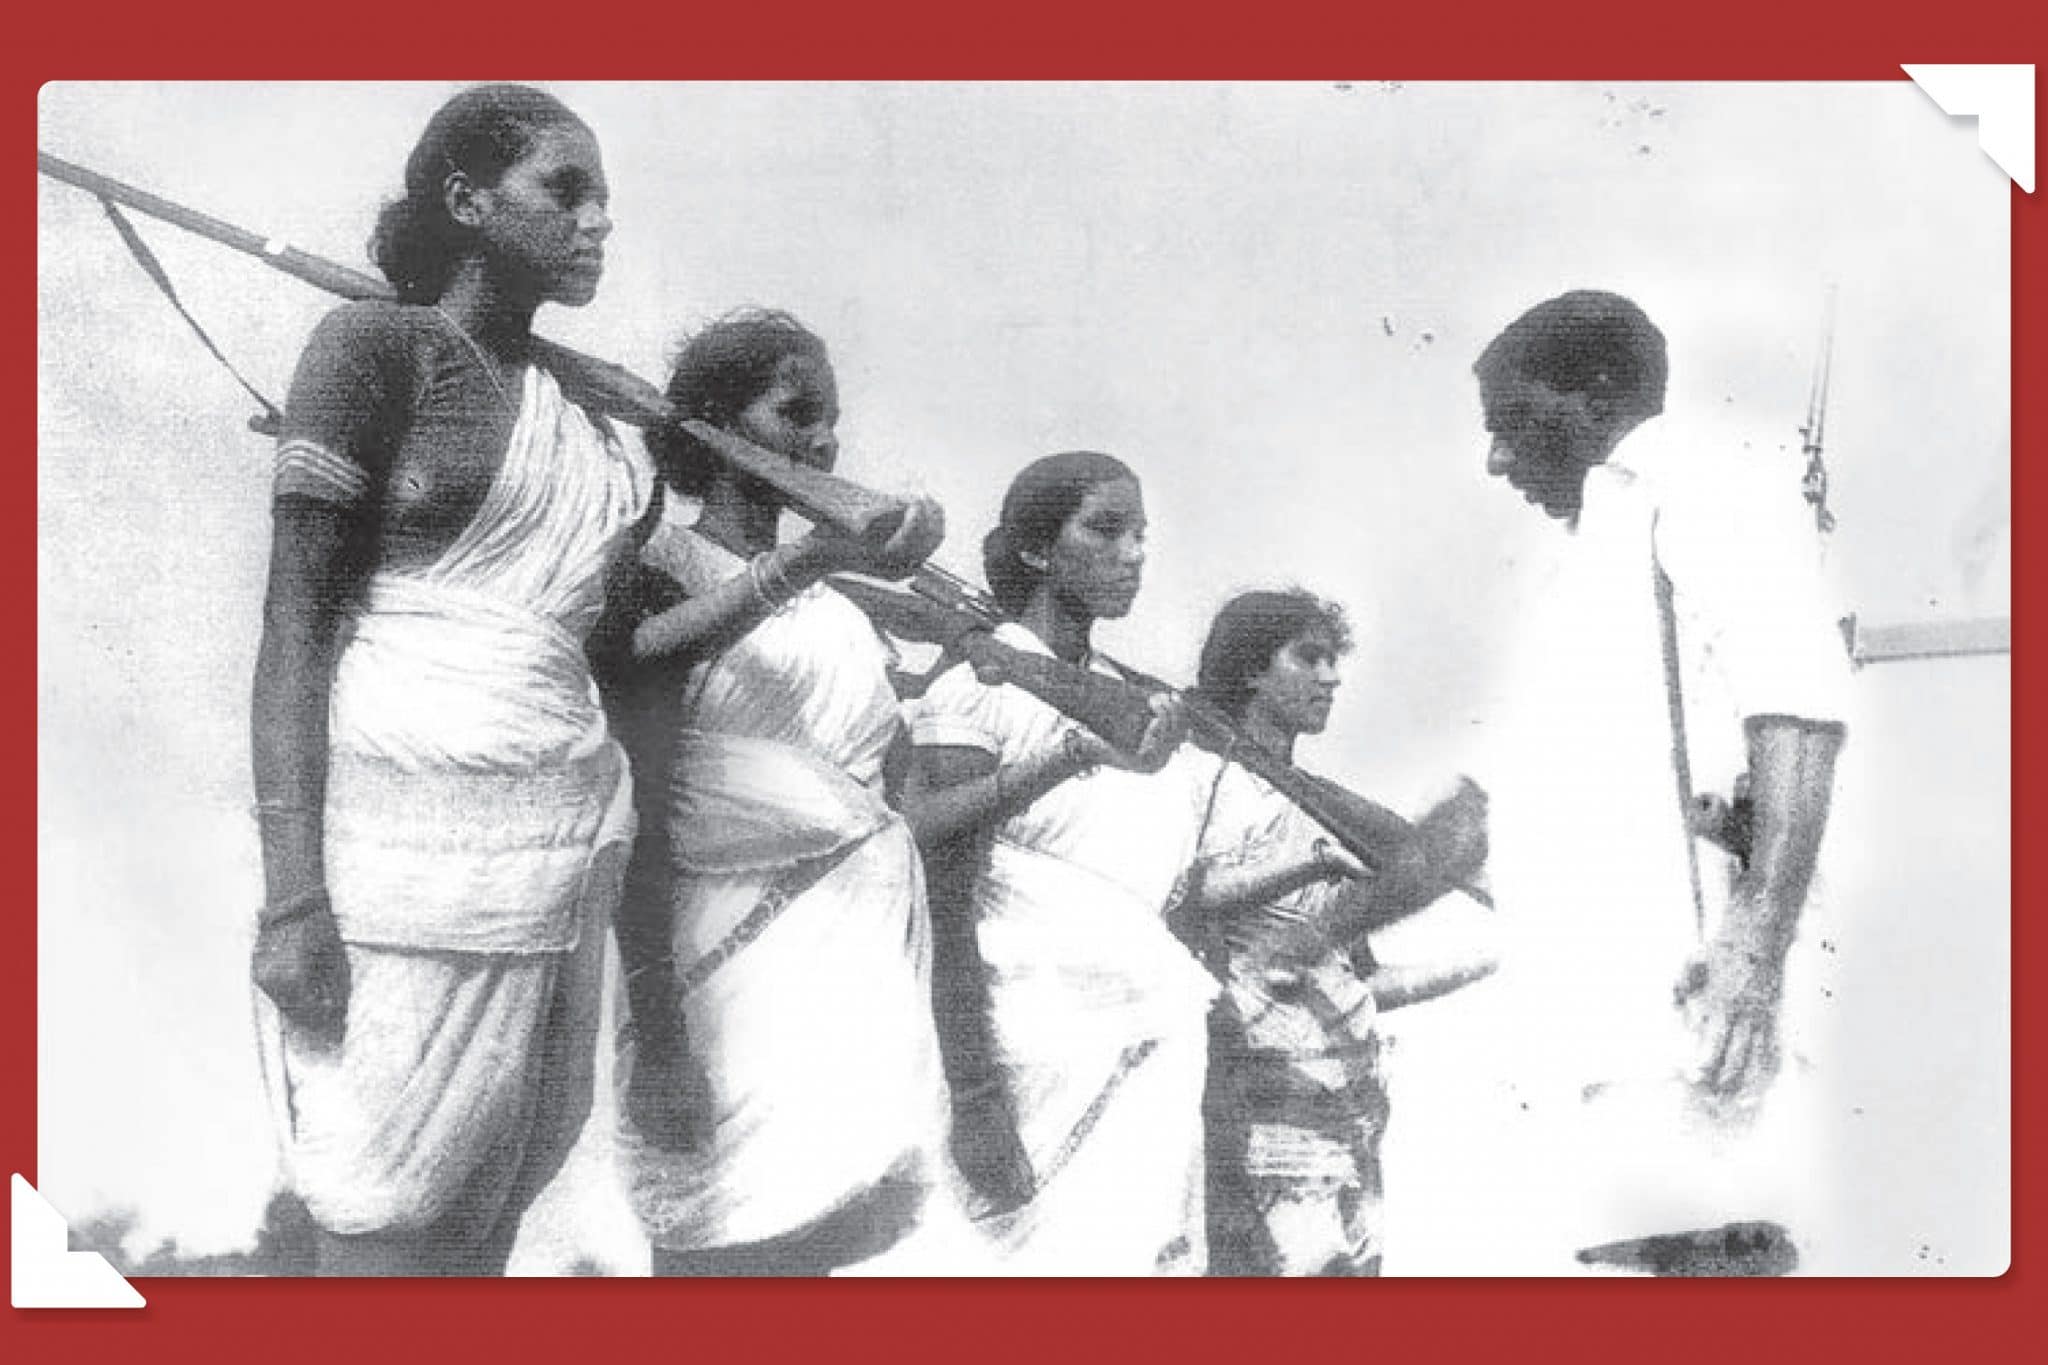 | Mallu Swarajyam left and other members of an armed squad during the Telangana armed struggle 1946 1951 | MR Online